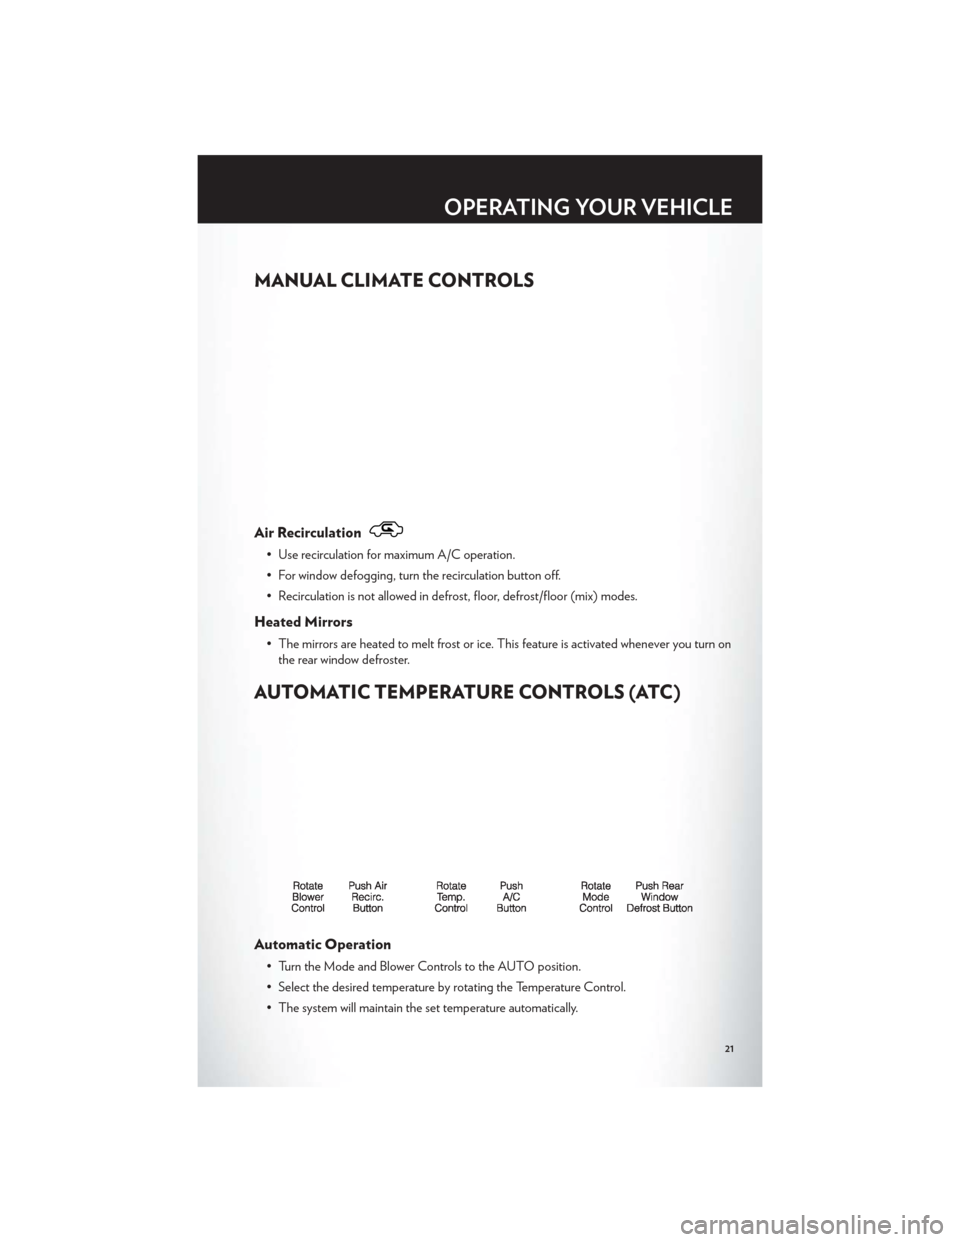 CHRYSLER 200 2012 1.G User Guide MANUAL CLIMATE CONTROLS
Air Recirculation
• Use recirculation for maximum A/C operation.
• For window defogging, turn the recirculation button off.
• Recirculation is not allowed in defrost, flo